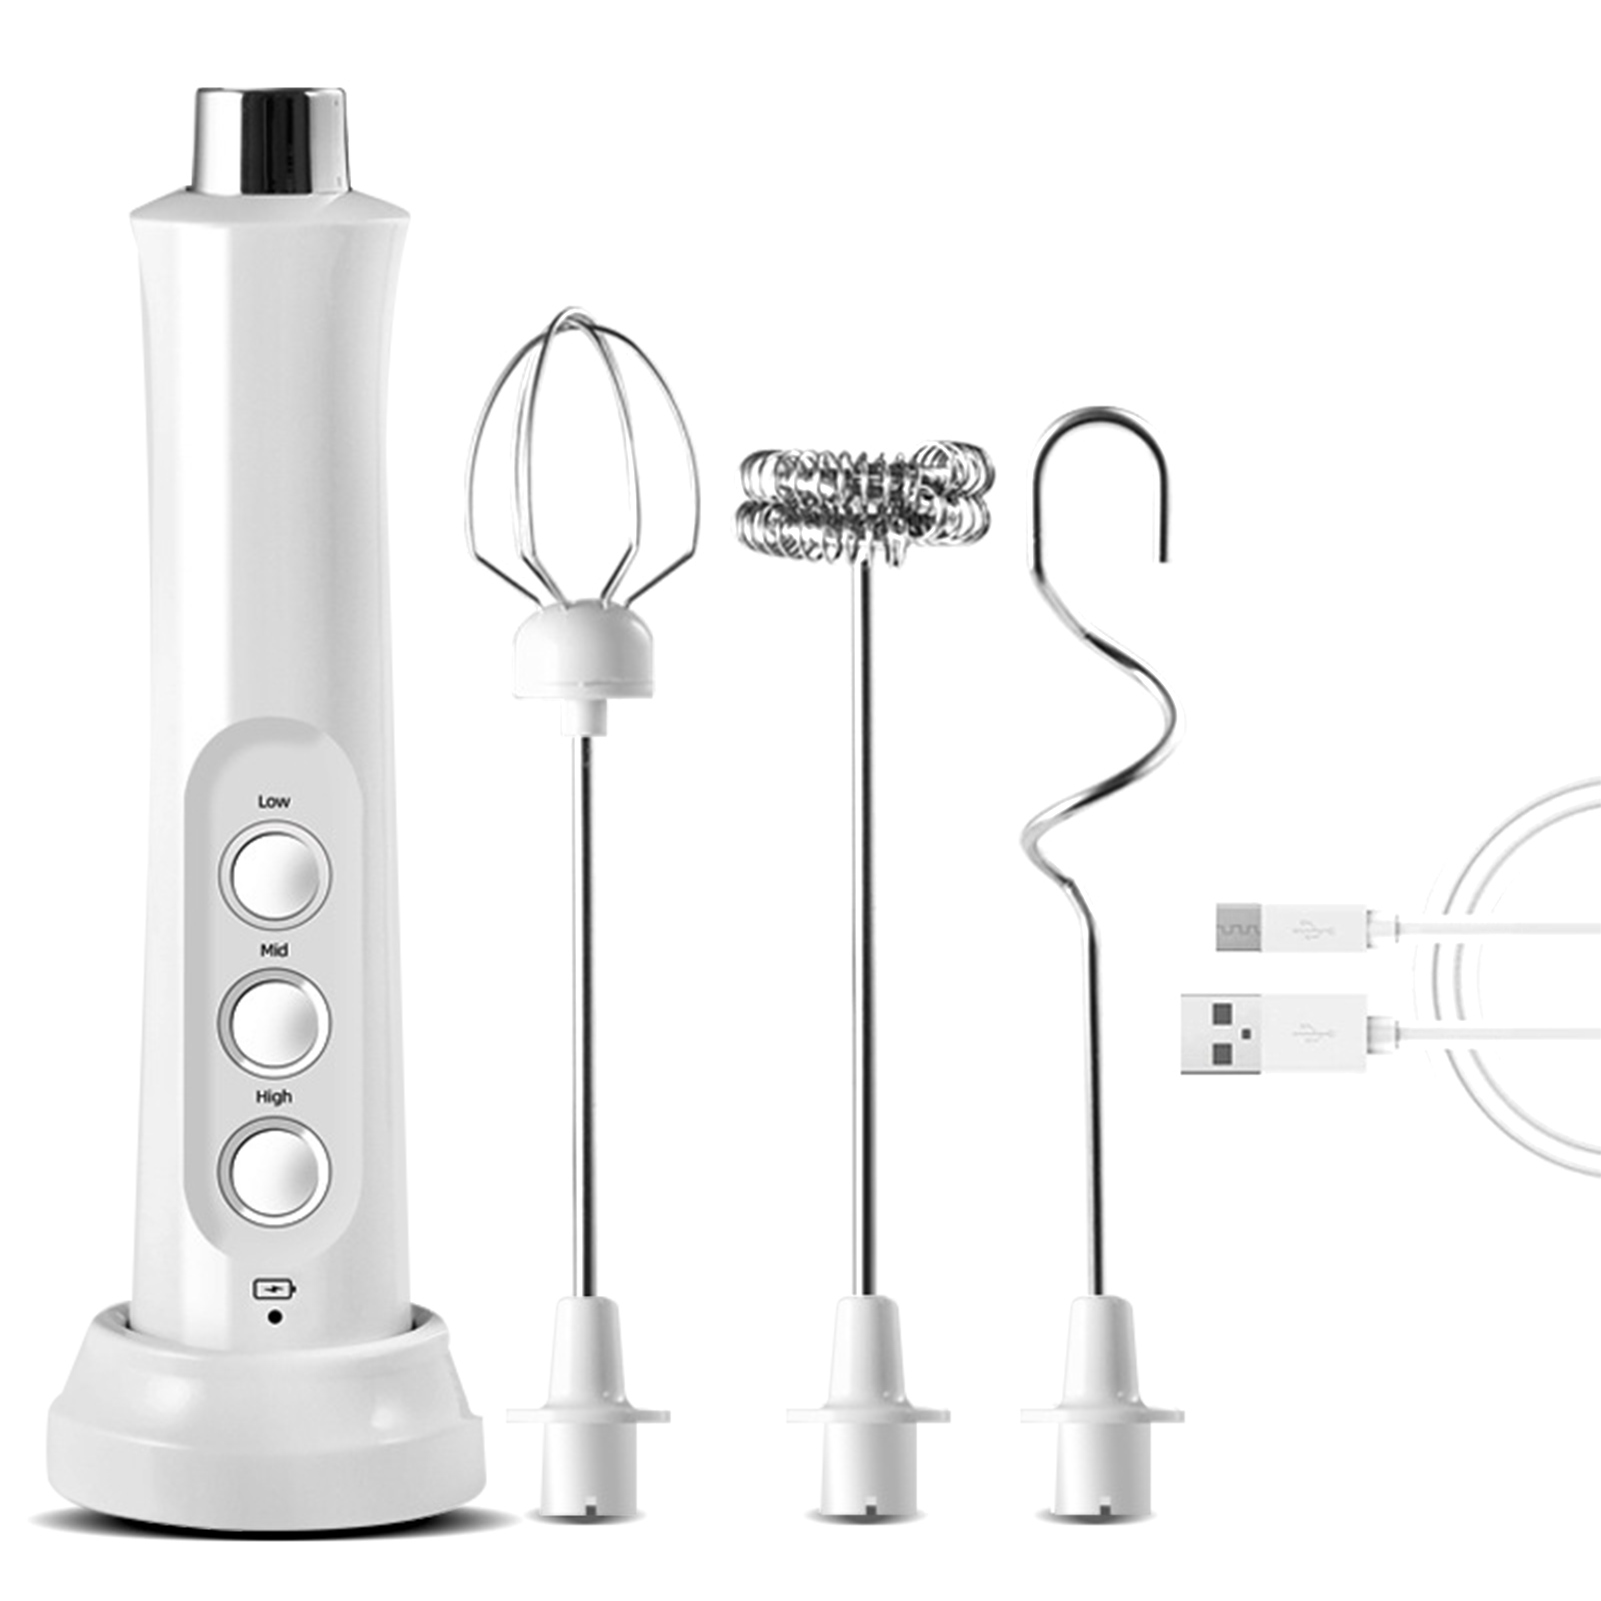 3 In 1 Portable Rechargeable Electric Handheld Milk Frother Maker